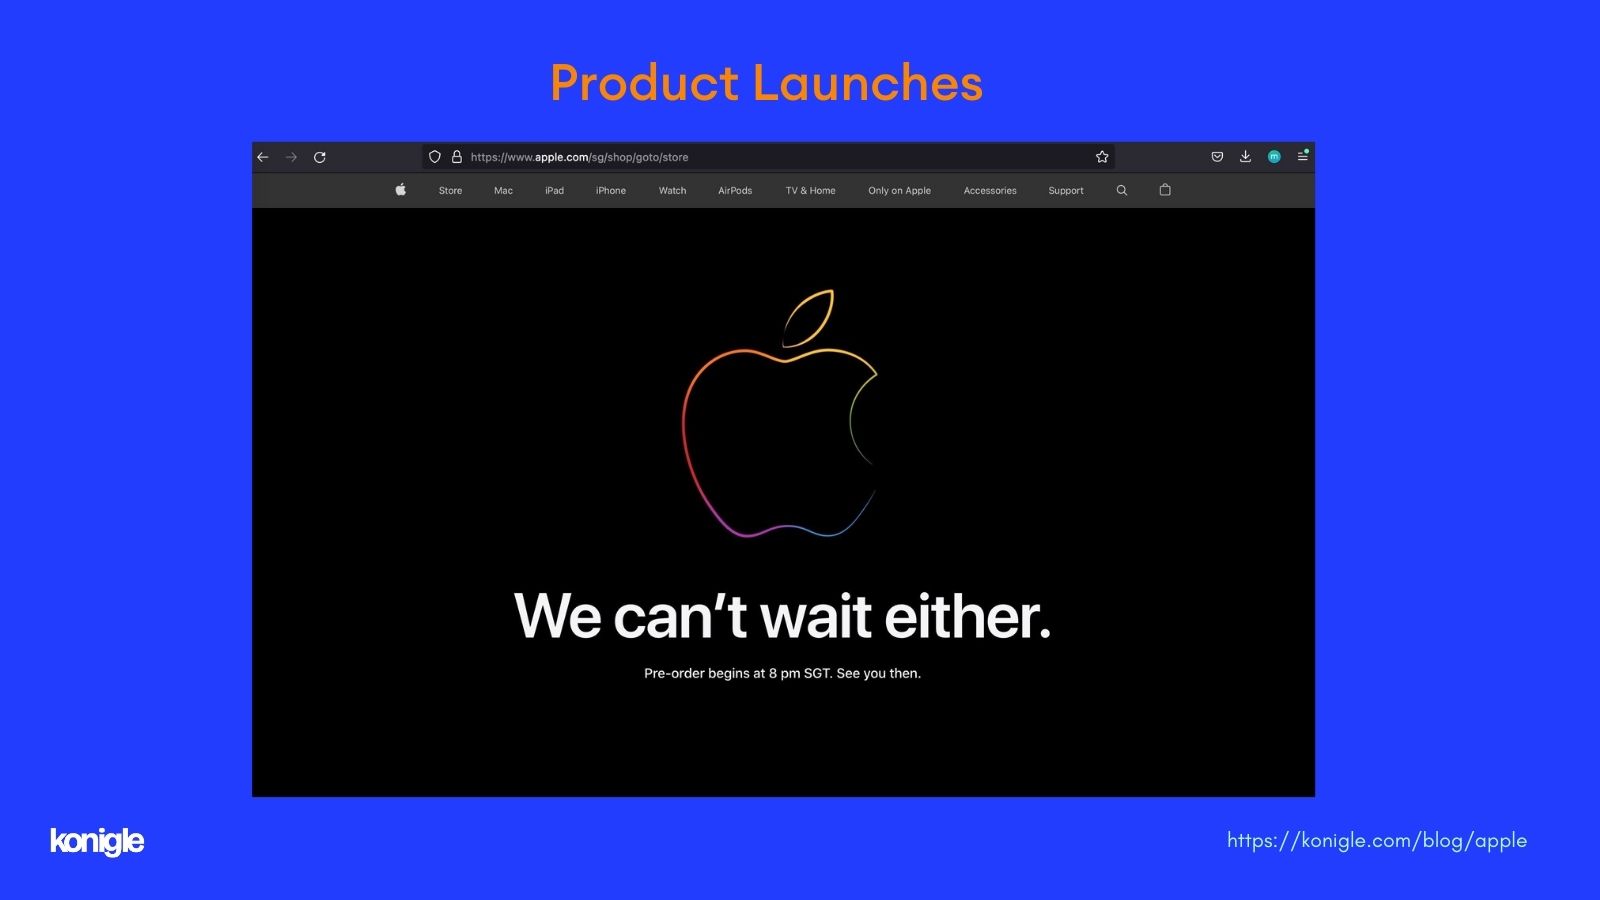 Apple is a master of Product launches